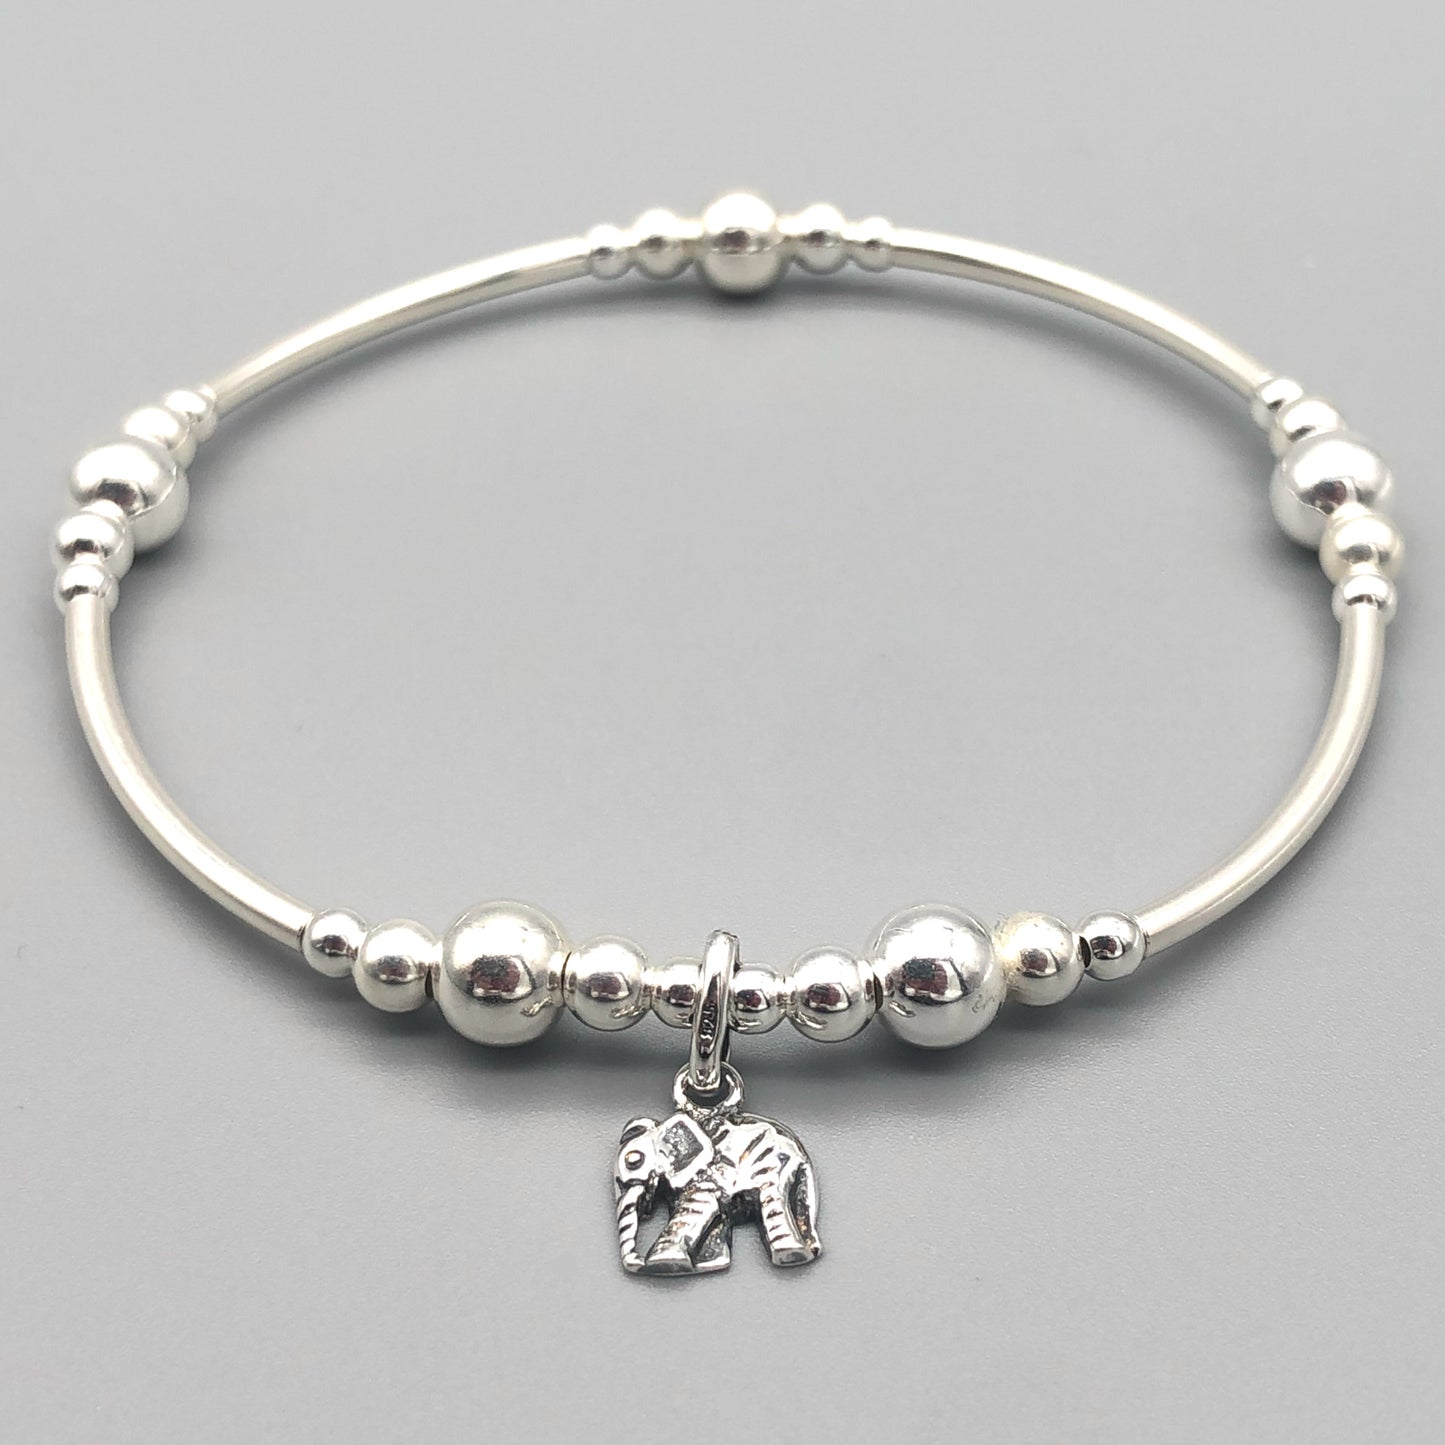 Elephant Charm Children's Sterling Silver Stacking Bracelet by My Silver Wish